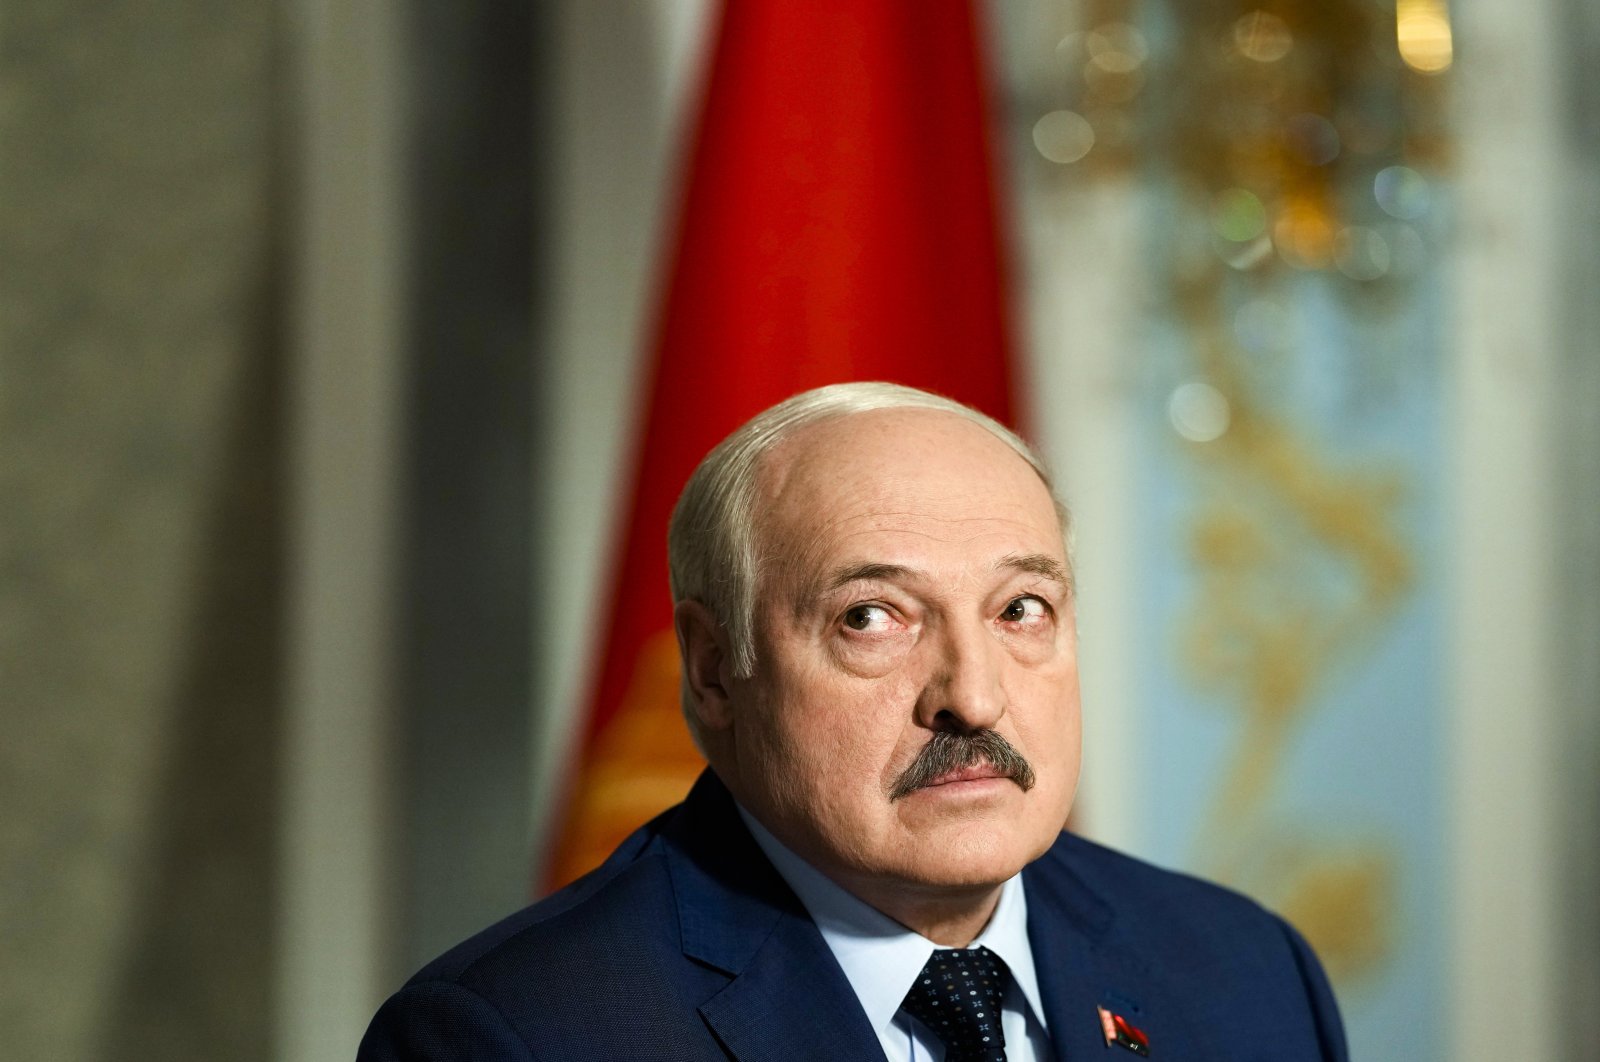 Belarus President Alexander Lukashenko listens to questions during an interview with the AP at the Independence Palace, Minsk, Belarus, May 5, 2022. (AP Photo)